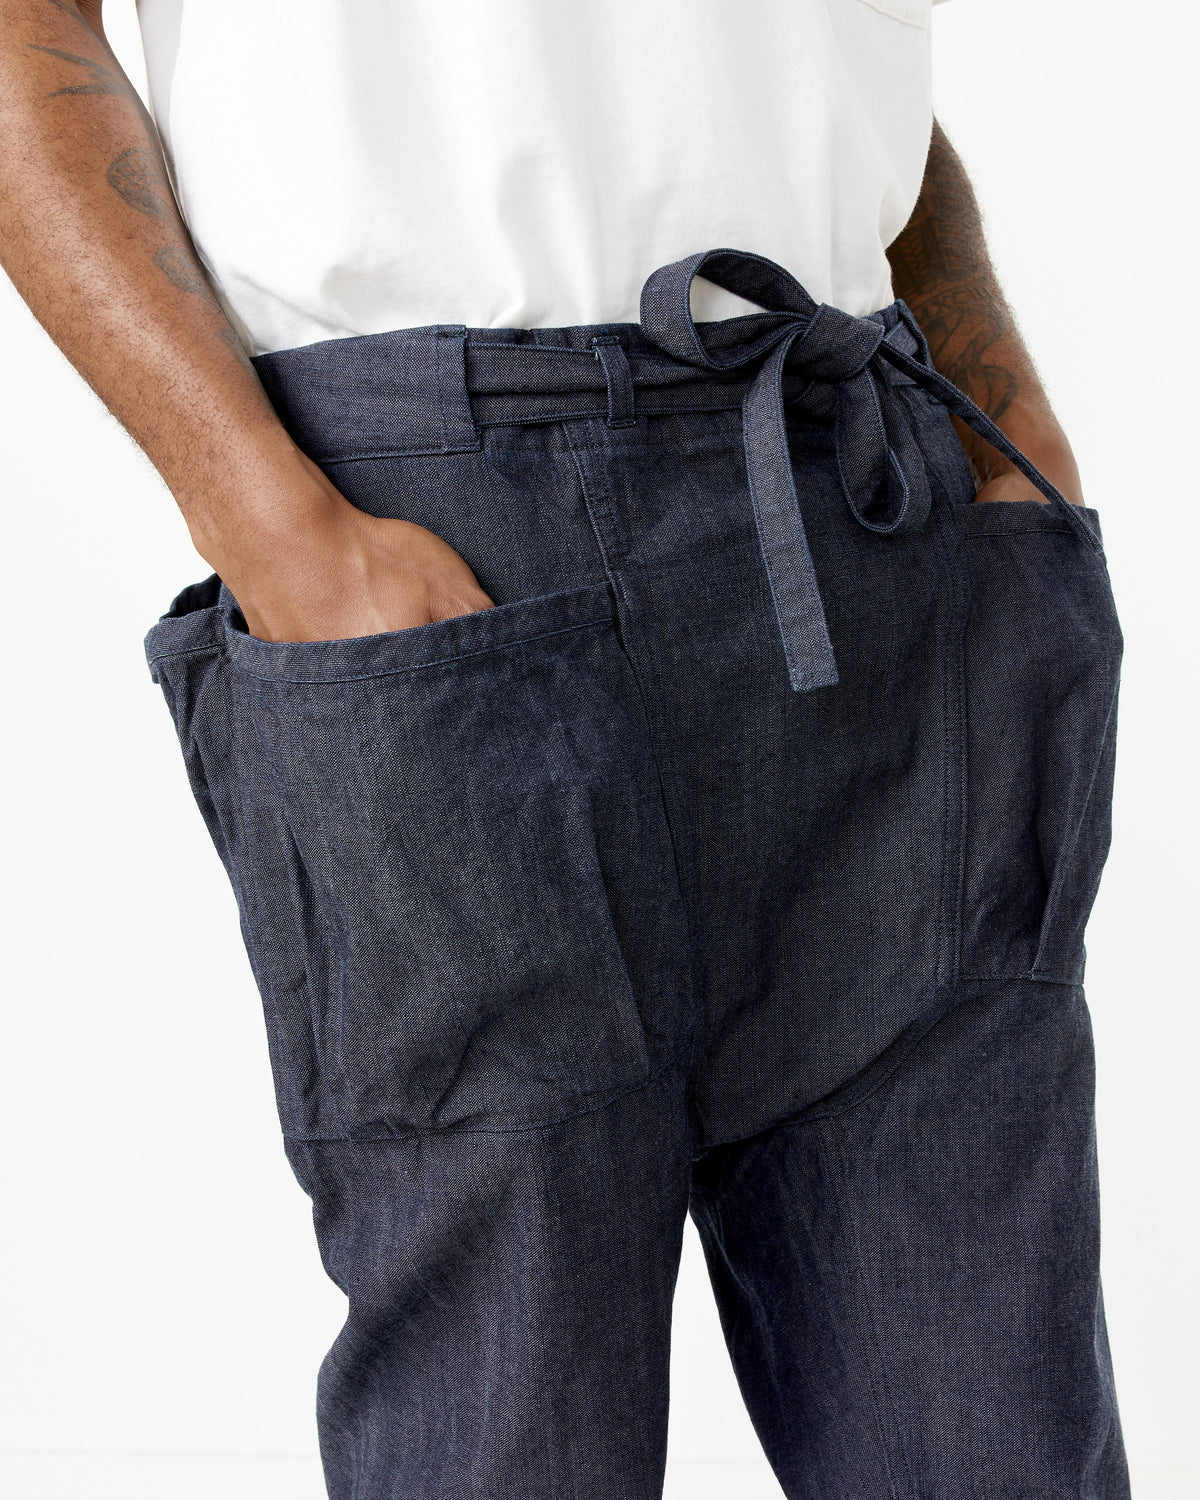 Discover the Ultimate Shopping Experience : OG Canvas Noragi Pants